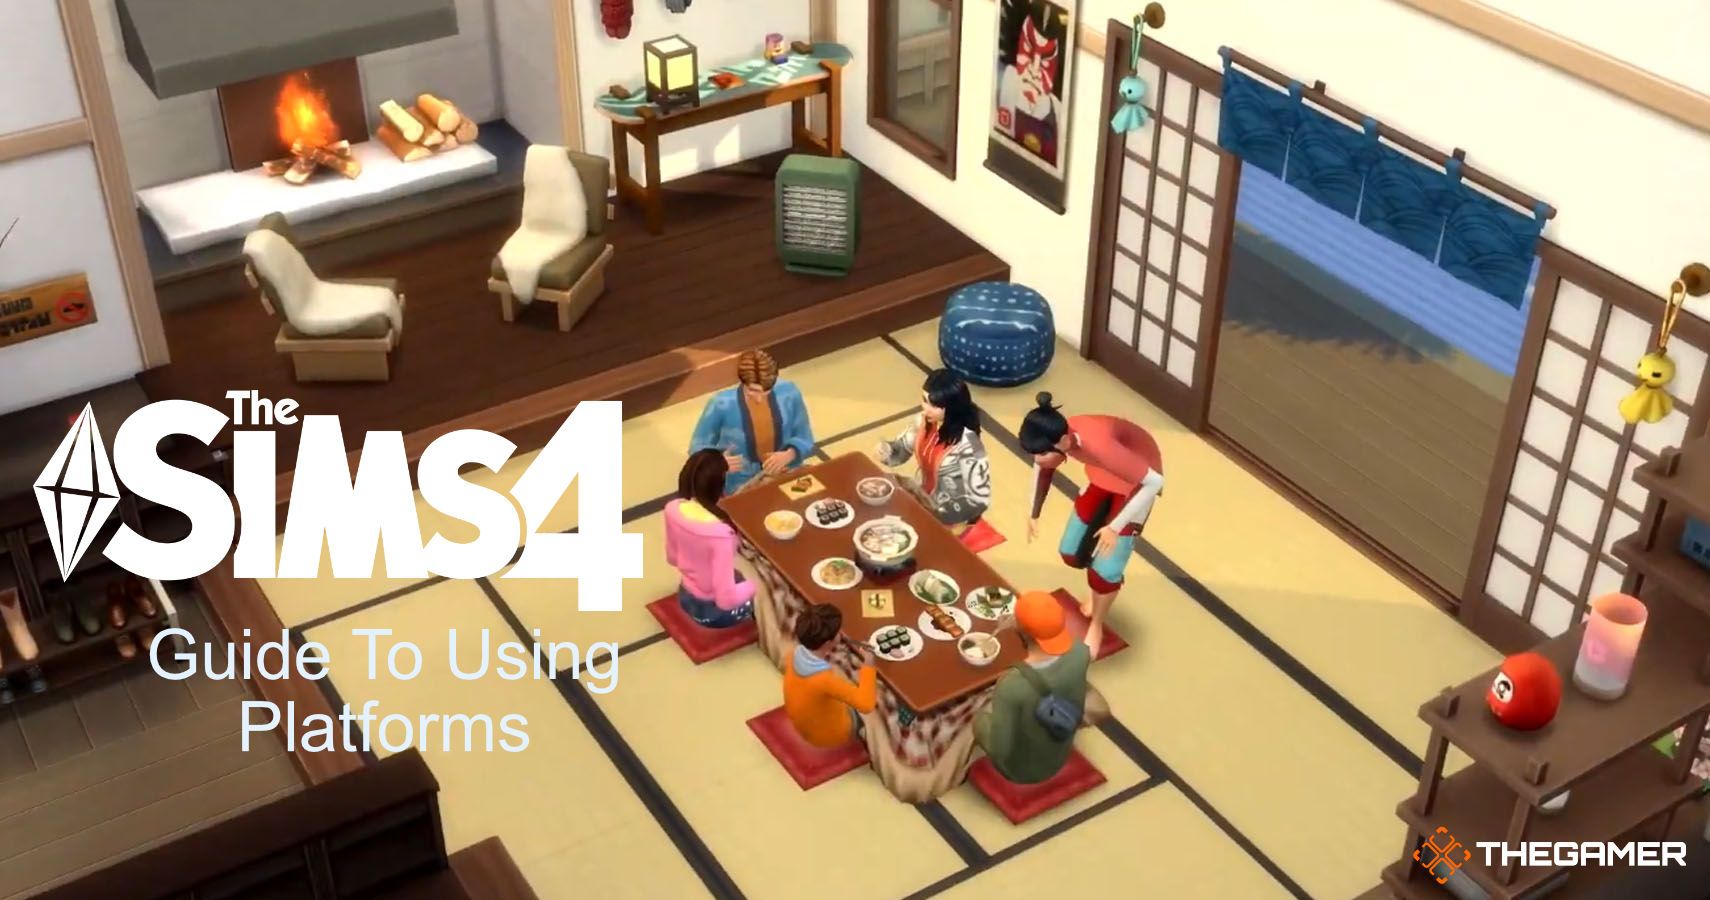 Sims eating in a room with platforms. text reads sims 4 guide to using platforms.